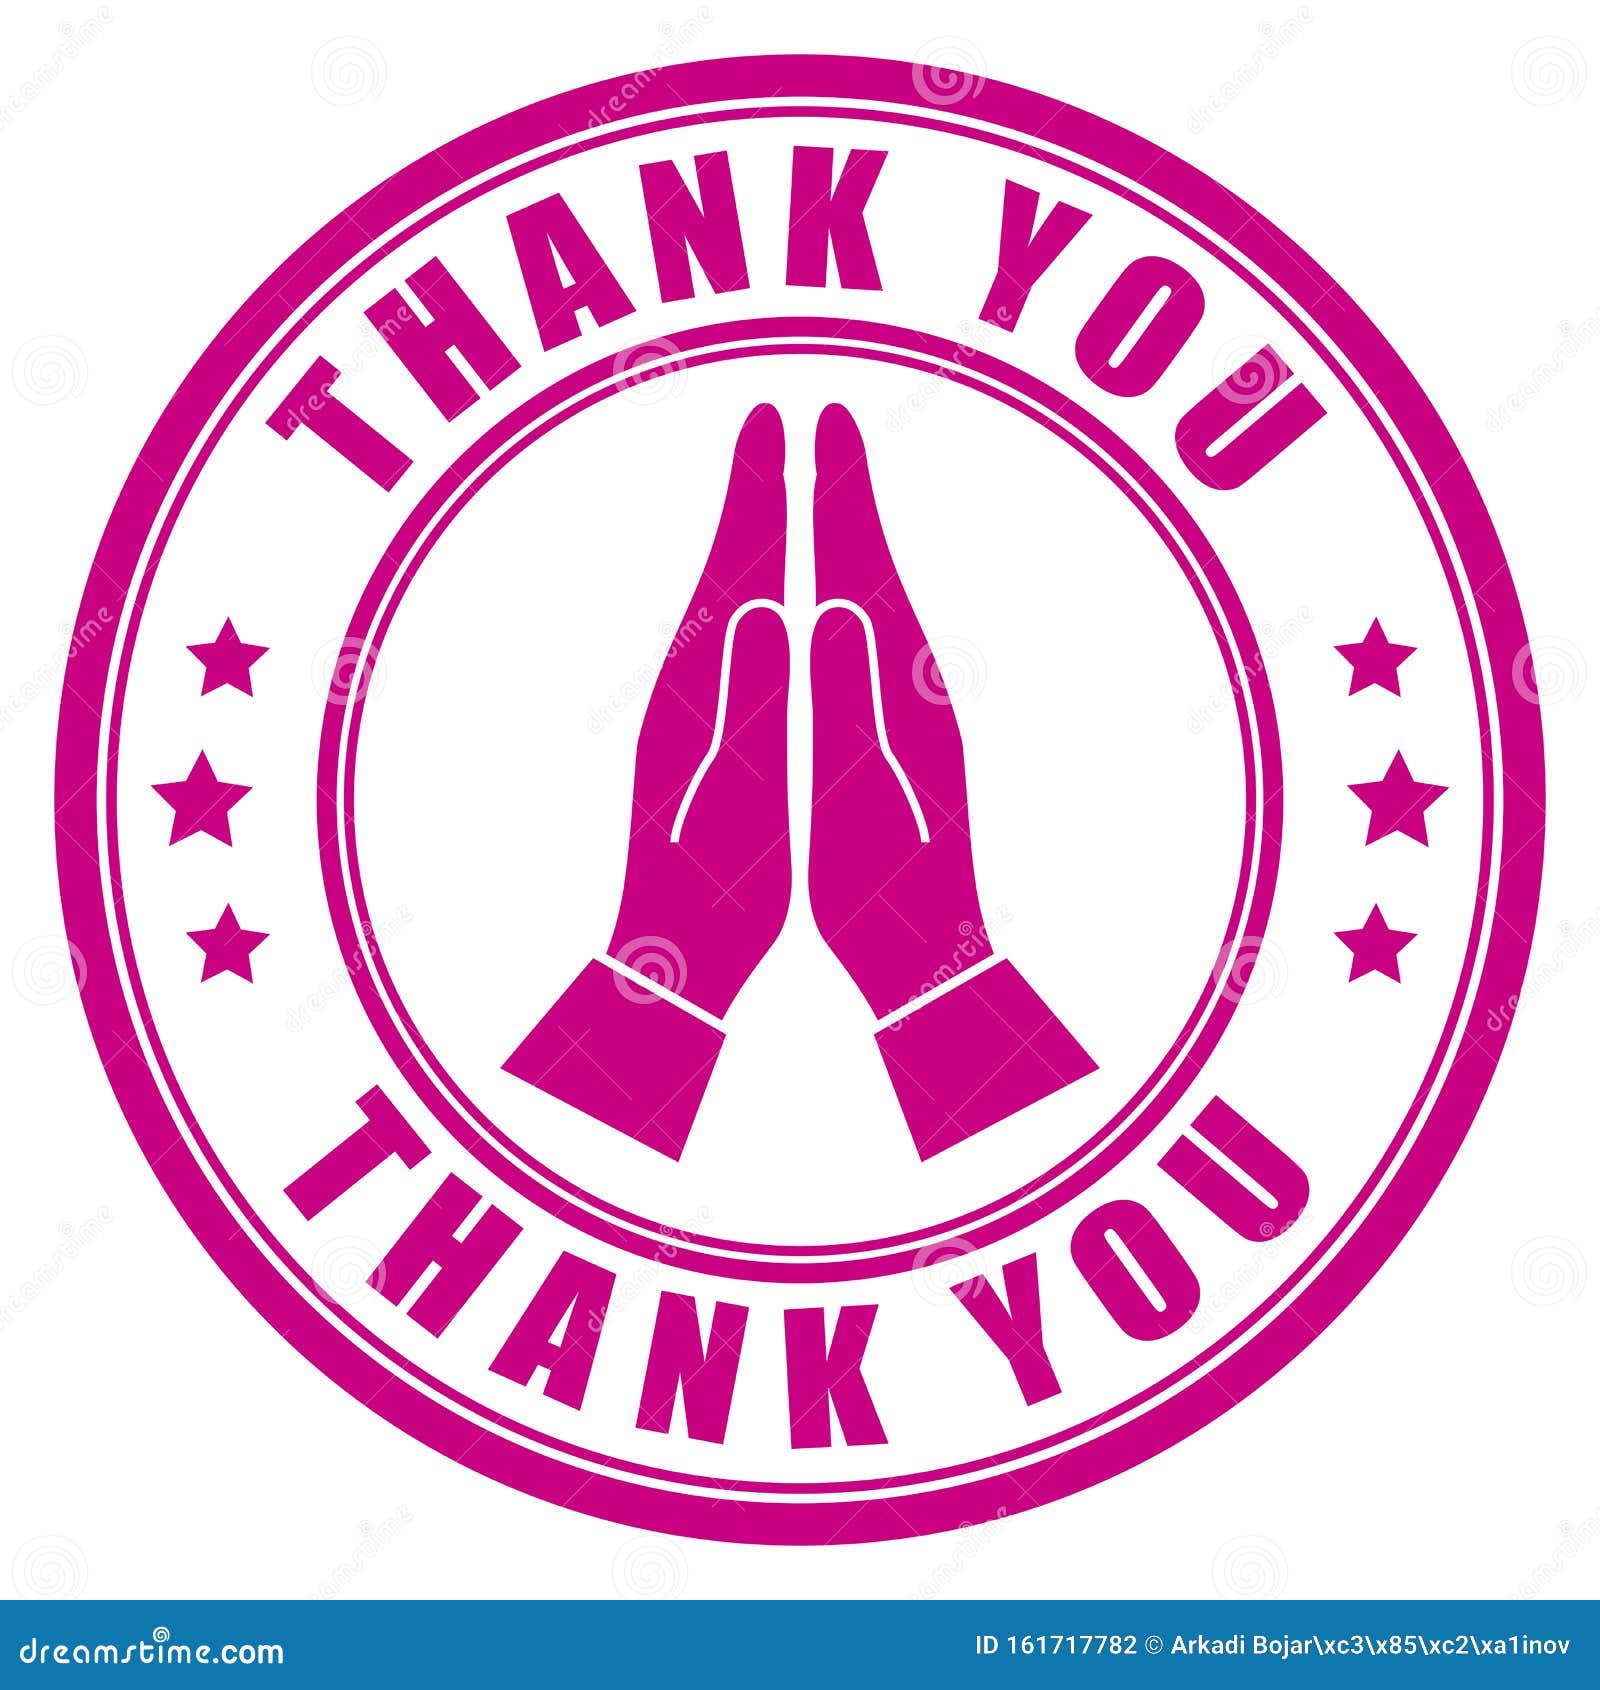 Thank You Hindu Sign Stock Vector Illustration Of Clipart 161717782